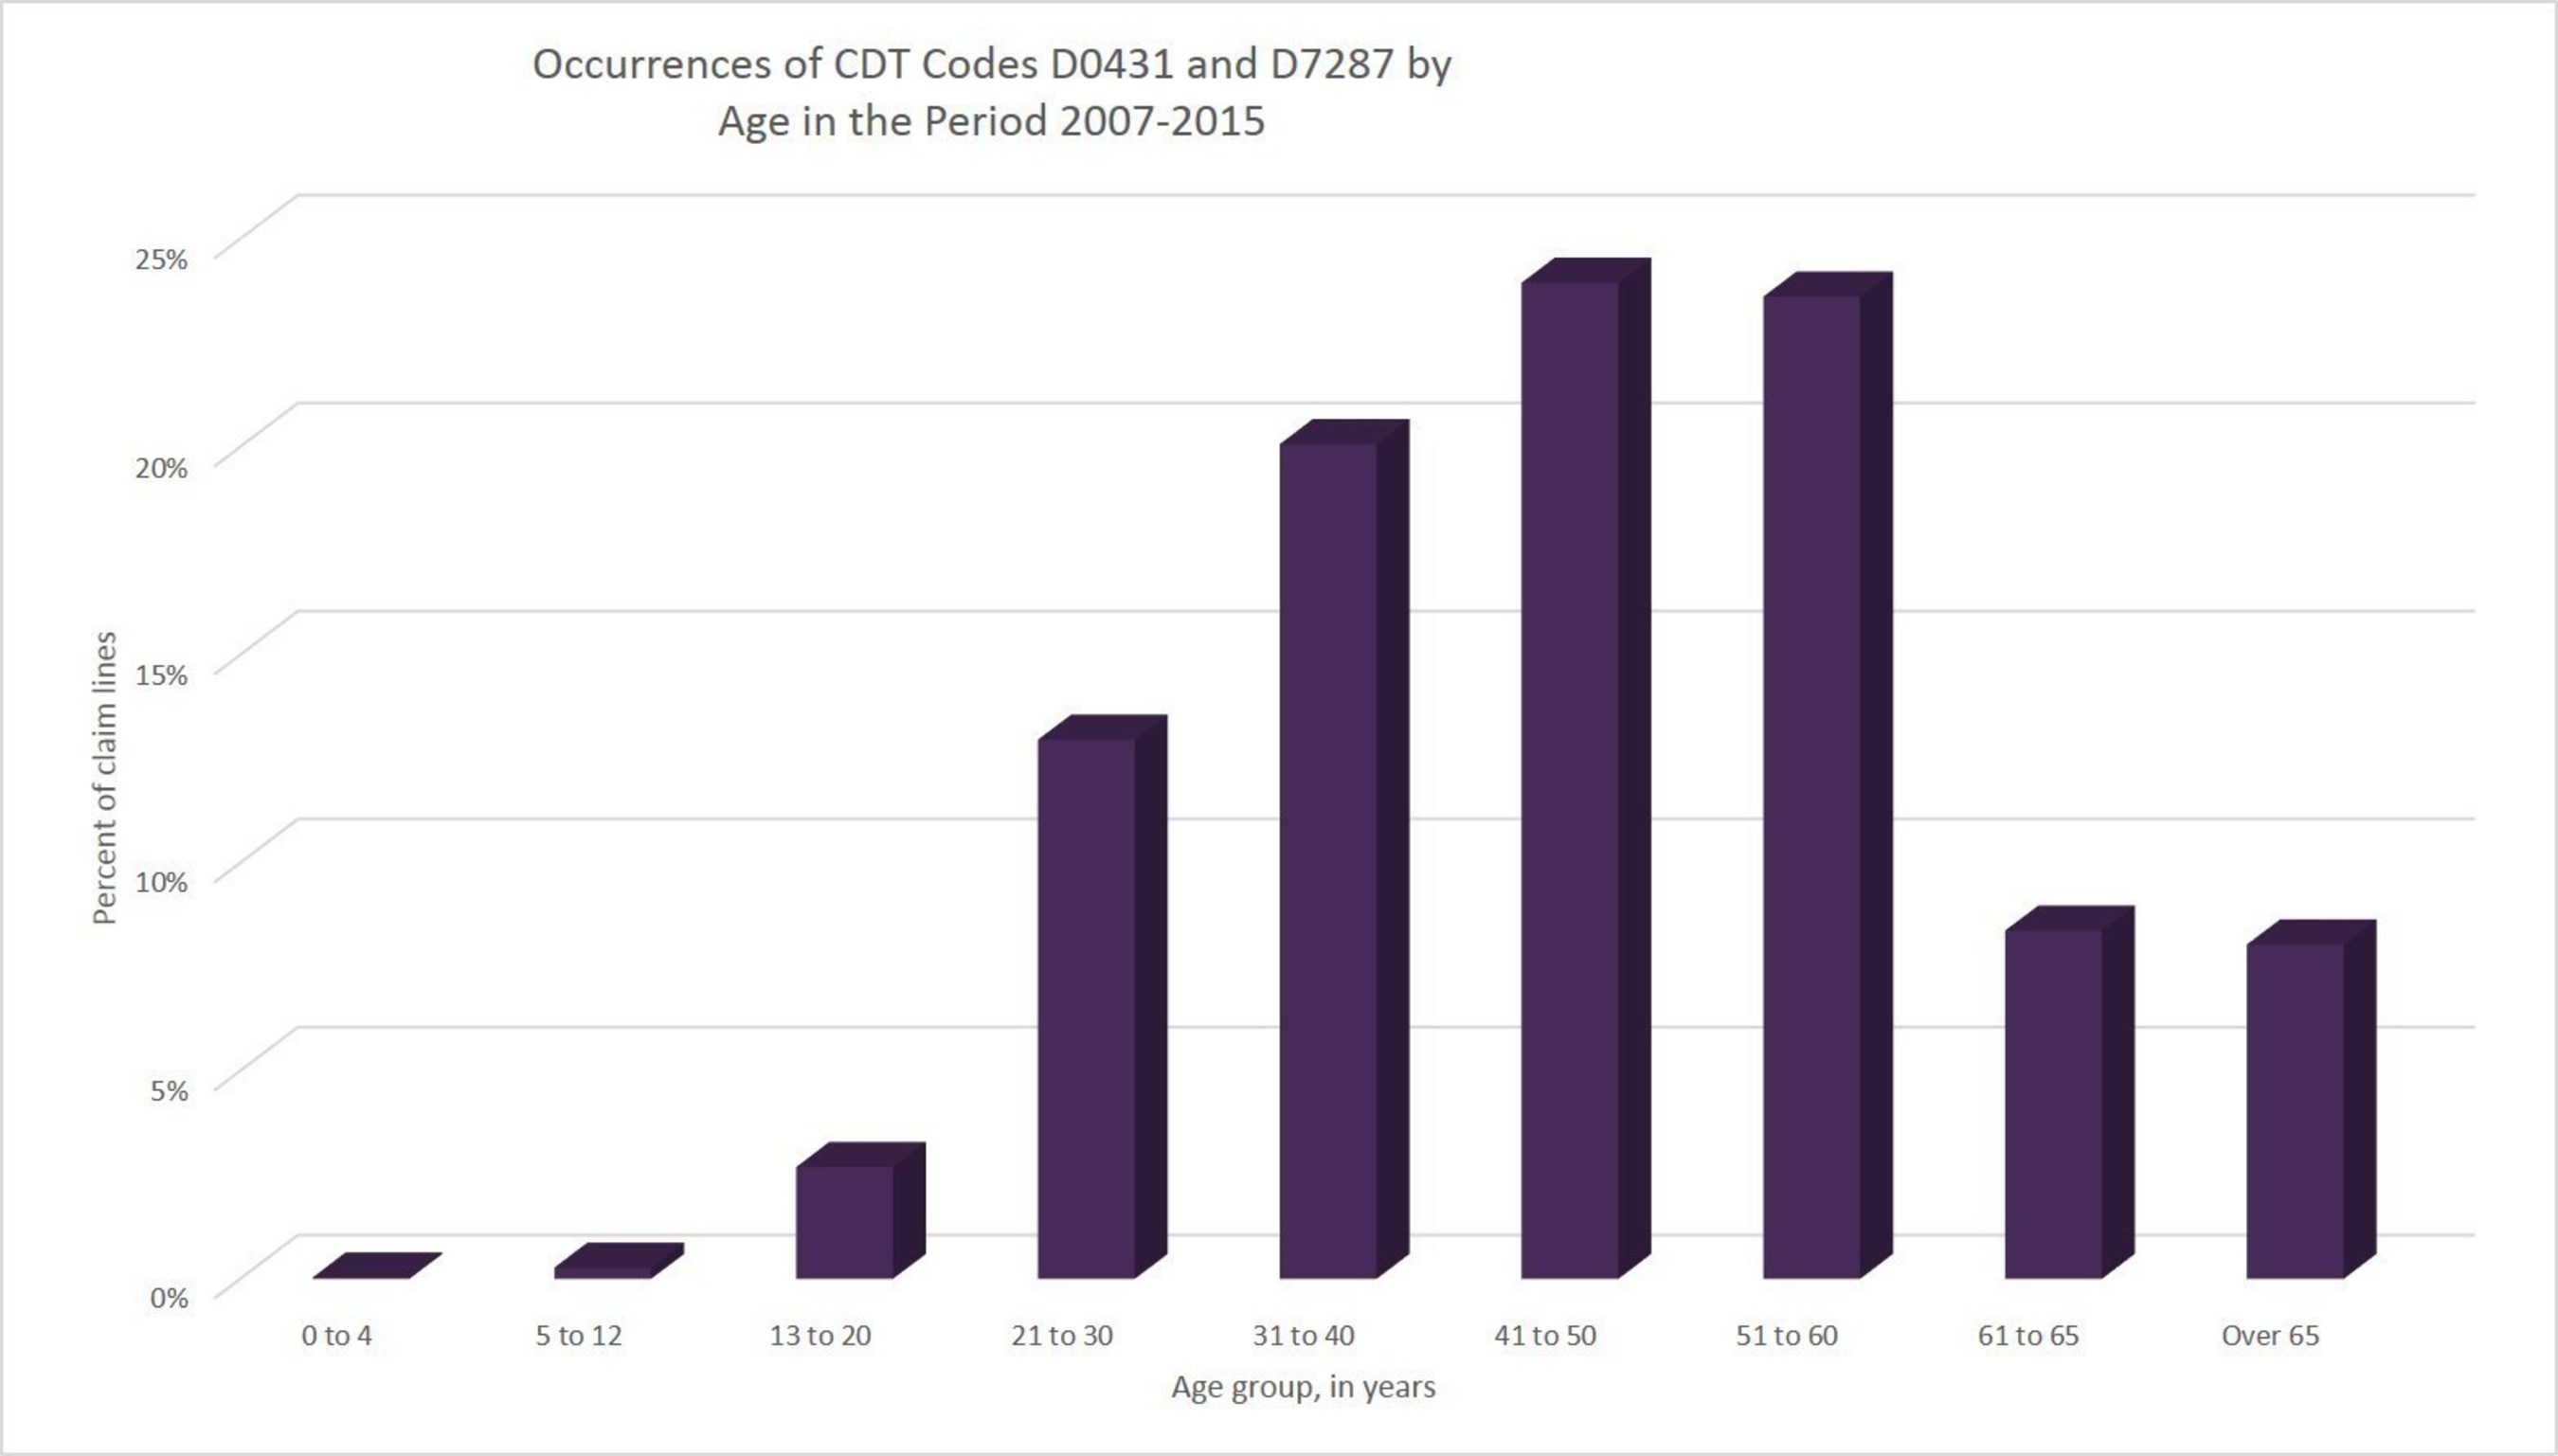 Occurrences of CDT Codes D0431 and D7287 by Age in the Period 2007-2015